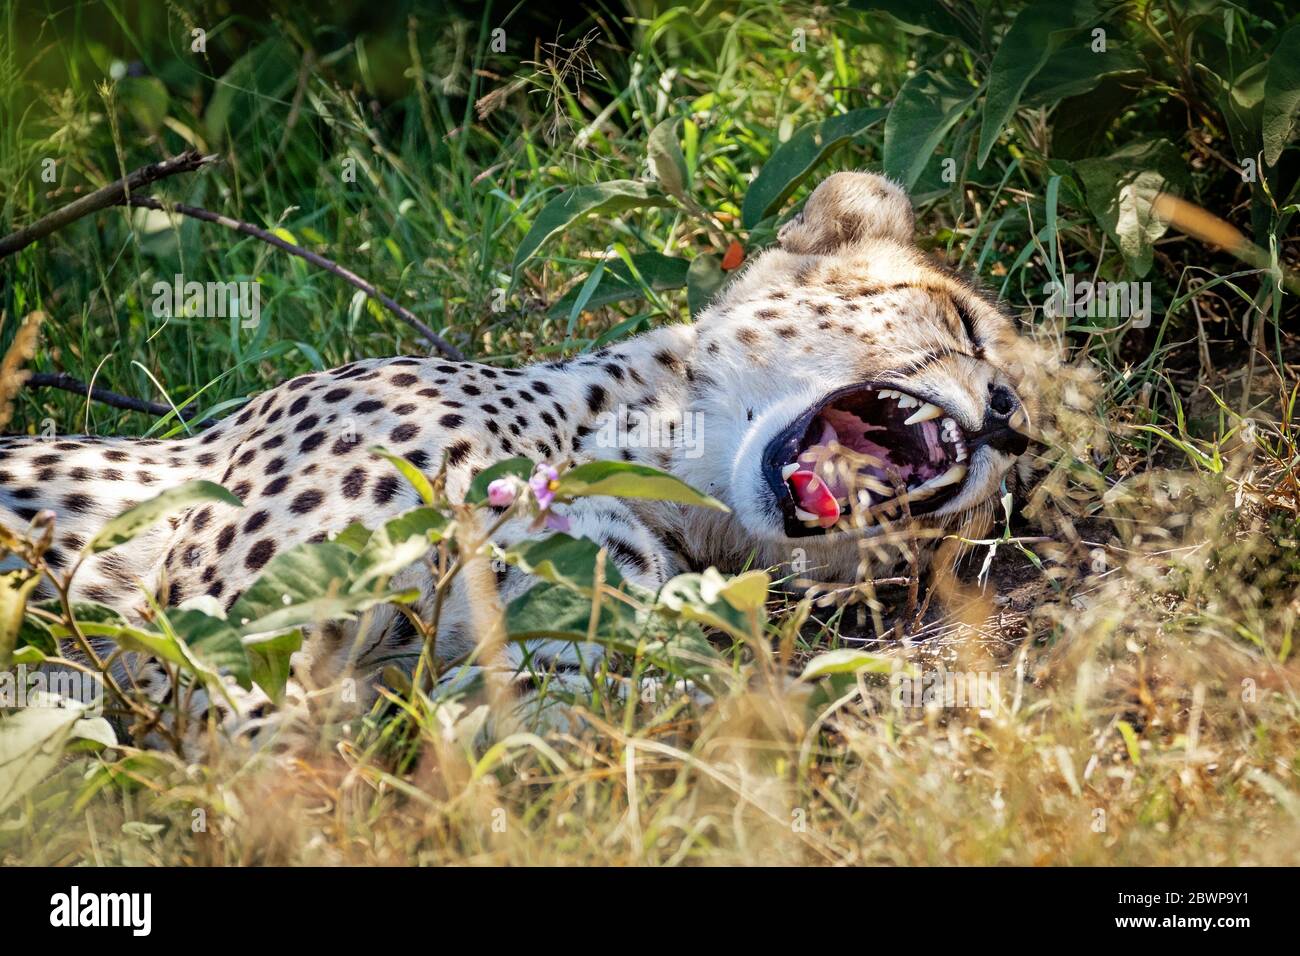 Tired cheetah cat lying down in Kenya, Africa field with mouth wide open to yawn Stock Photo